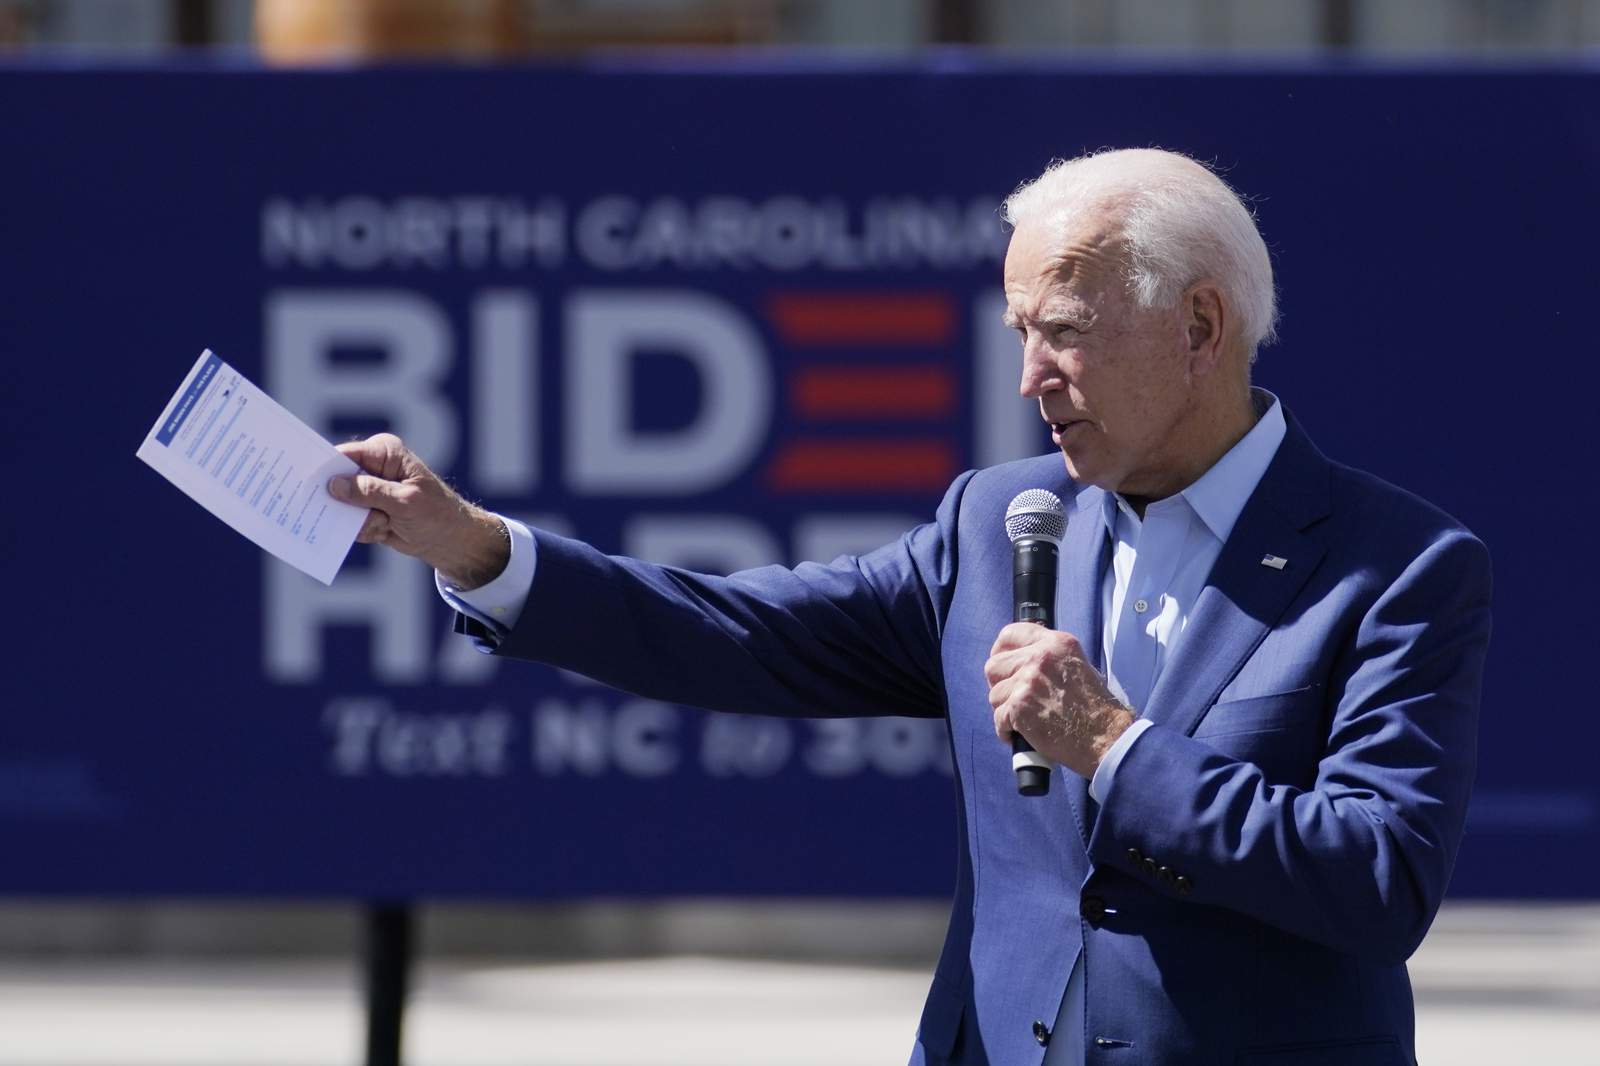 Biden's push for unity faces test with Supreme Court fight